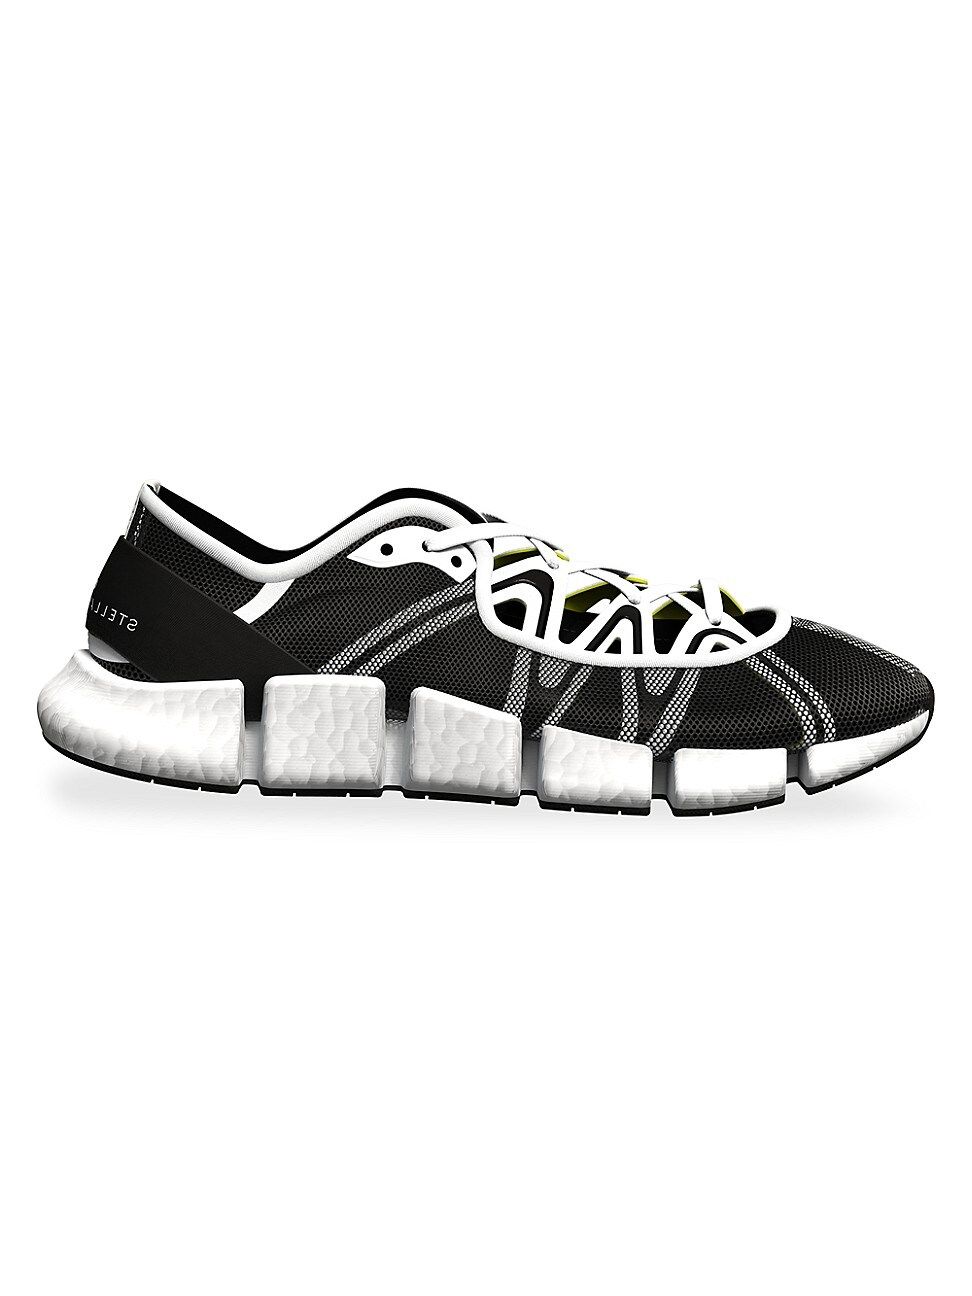 adidas by Stella McCartney Women's Climacool Vento Sneakers - Size 6 | Saks Fifth Avenue